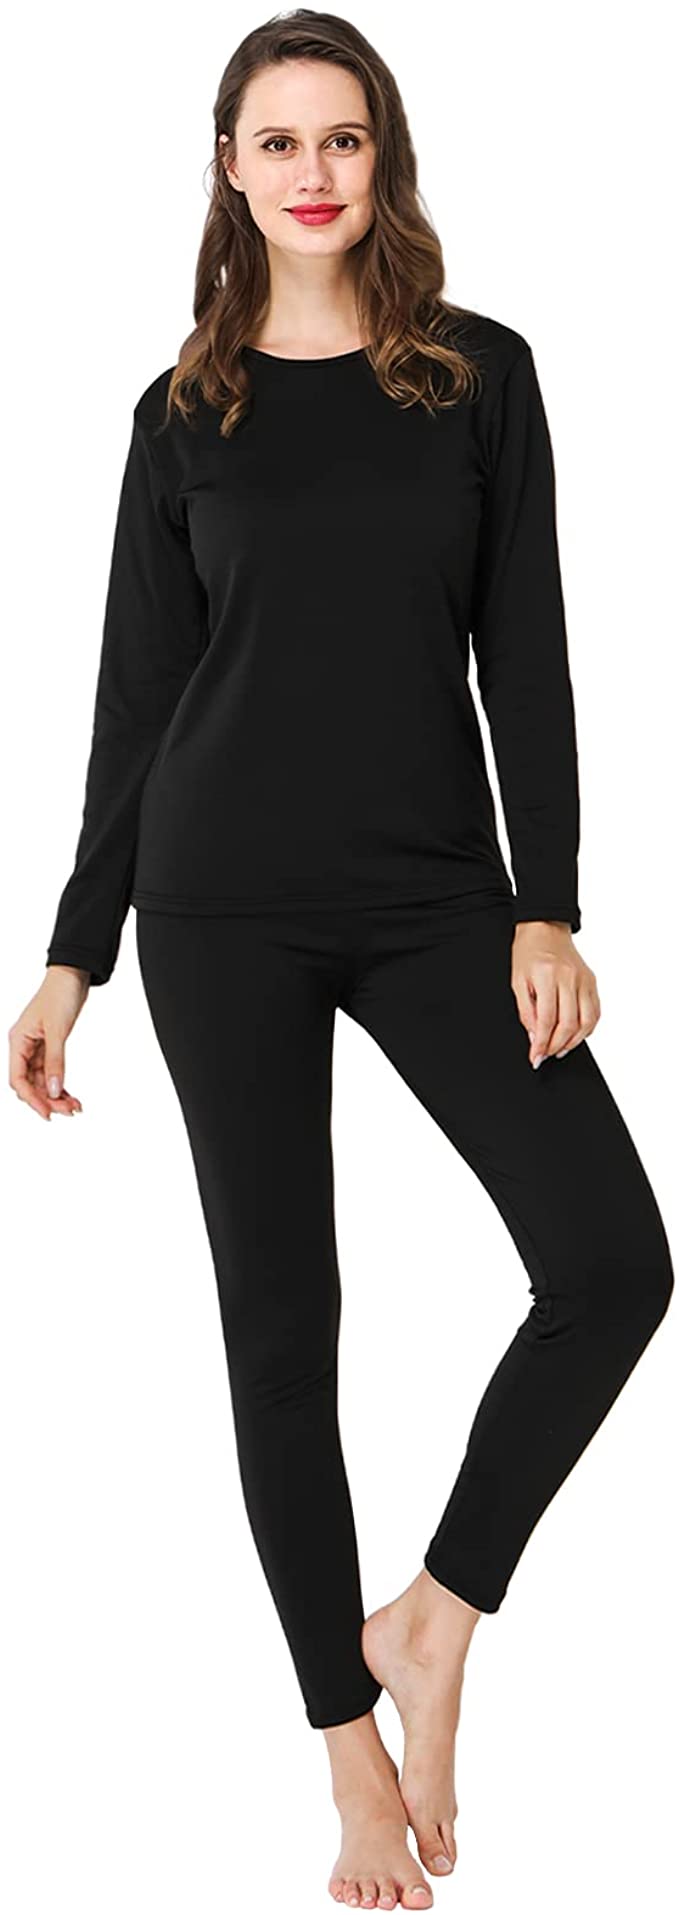 Thermal Underwear for Women Thermal Underwear Set, Ultra Soft Long Johns for Women with Fleece Lined Top Bottom $10.99